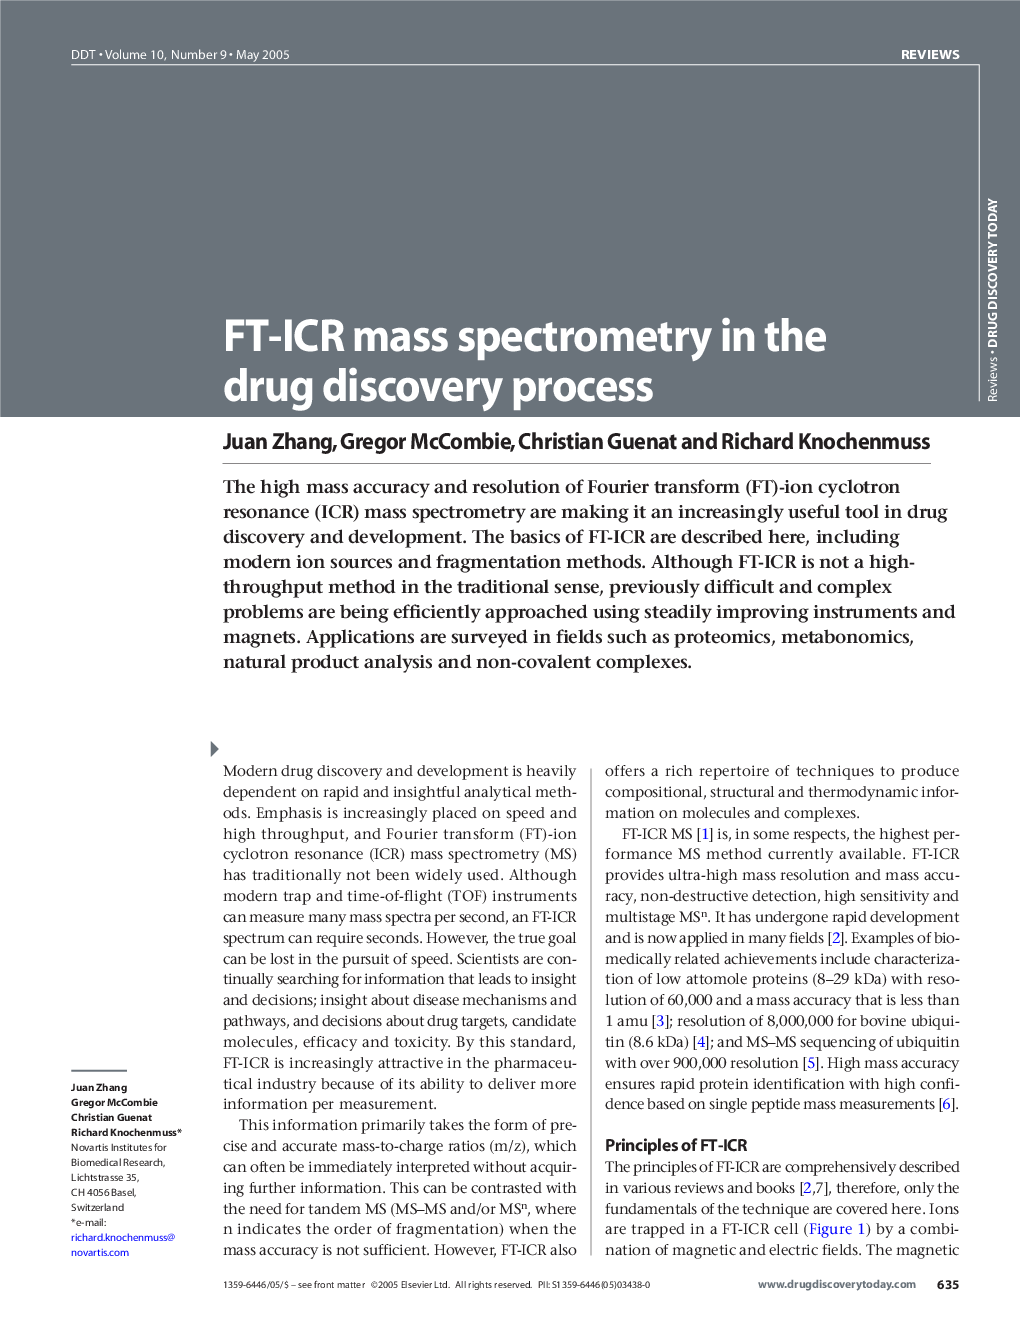 FT-ICR mass spectrometry in the drug discovery process